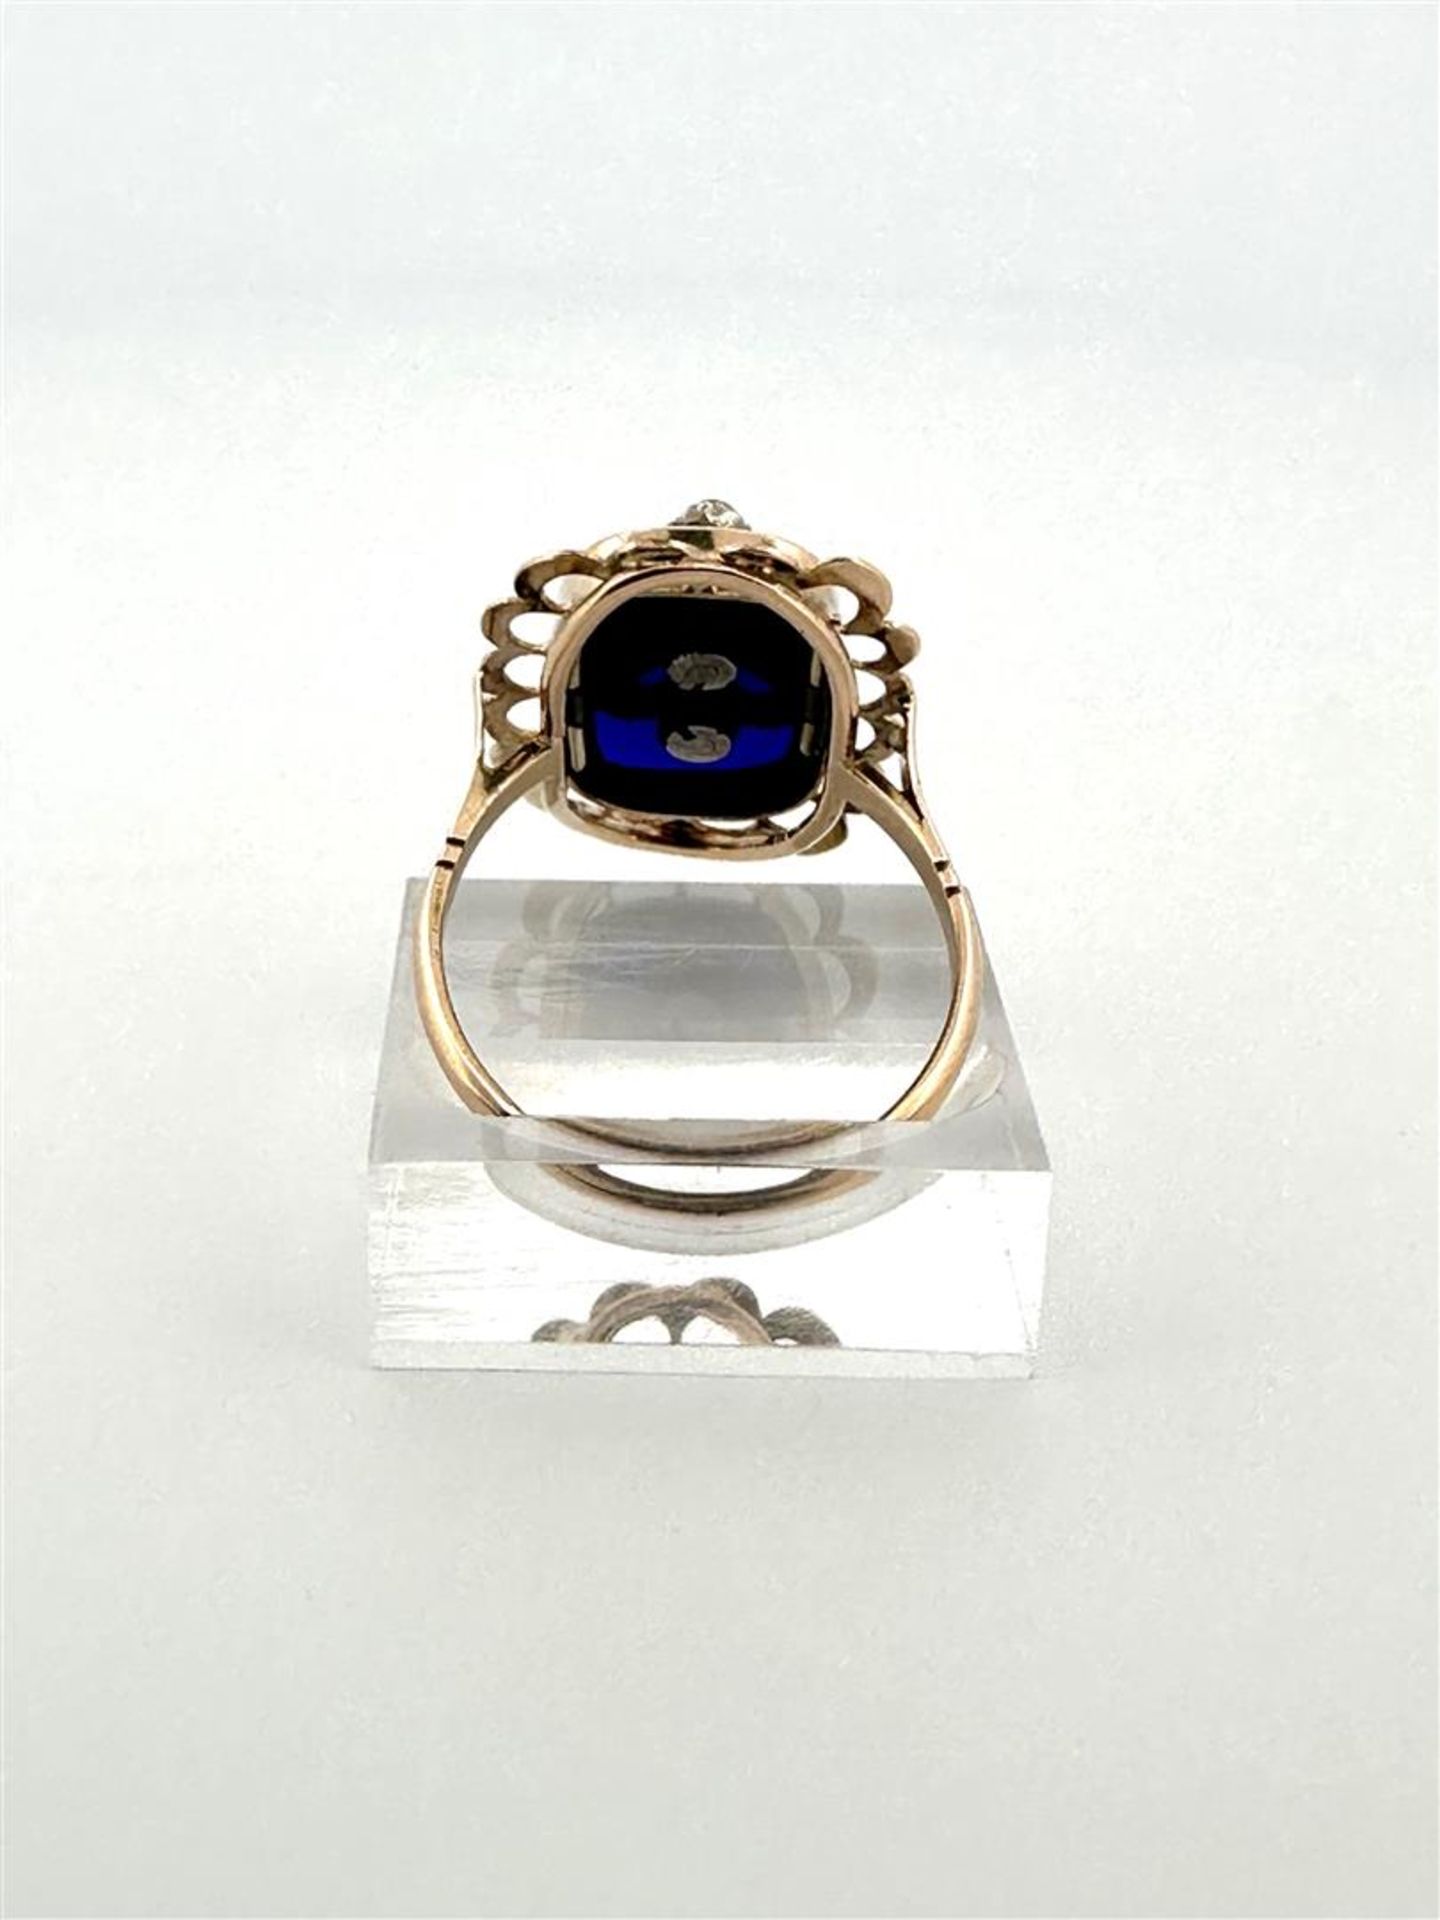 14kt bicolor gold antique appliqué ring with openwork scalloped edge, blue glass and rough diamond.
 - Image 3 of 5